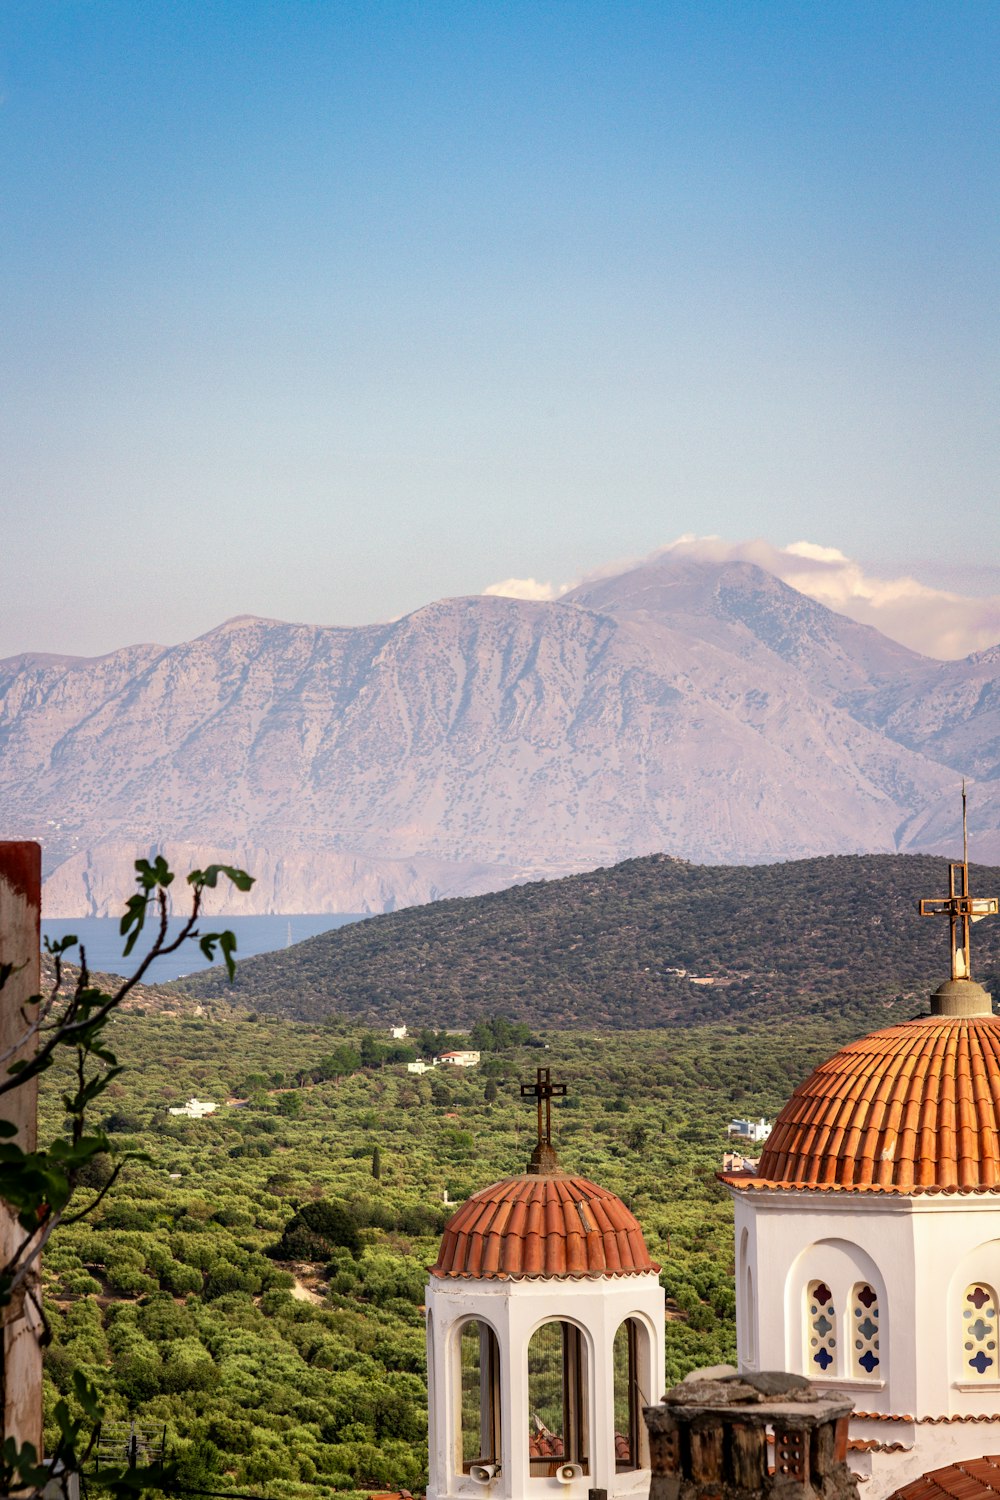 a view of a mountain range with a church in the foreground